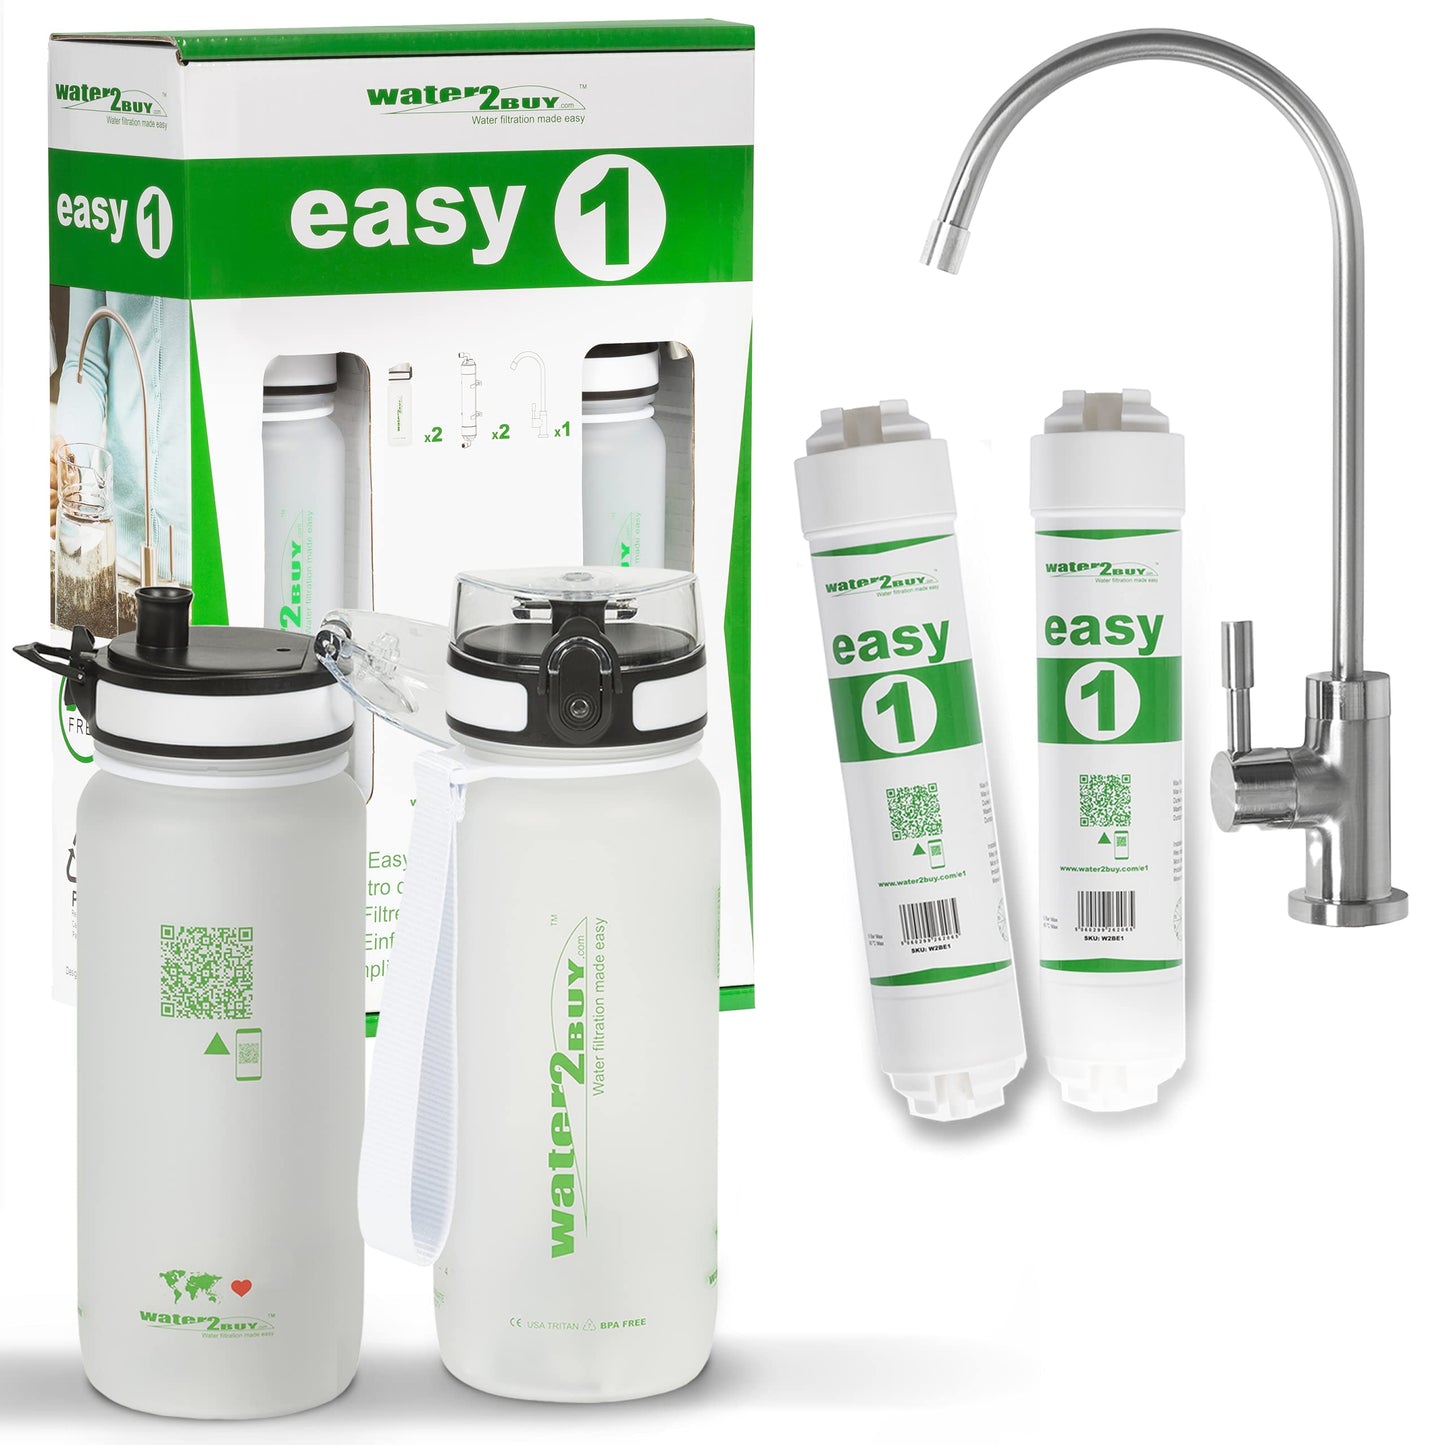 Easy1 Water Filter System with 2 Water Bottles, provide 6000L of clean water for 6-12 months, NSF/FDS/ISO 9001 & 14001 Certified, Under Sink Water Filter tap Easy DIY Kit Model